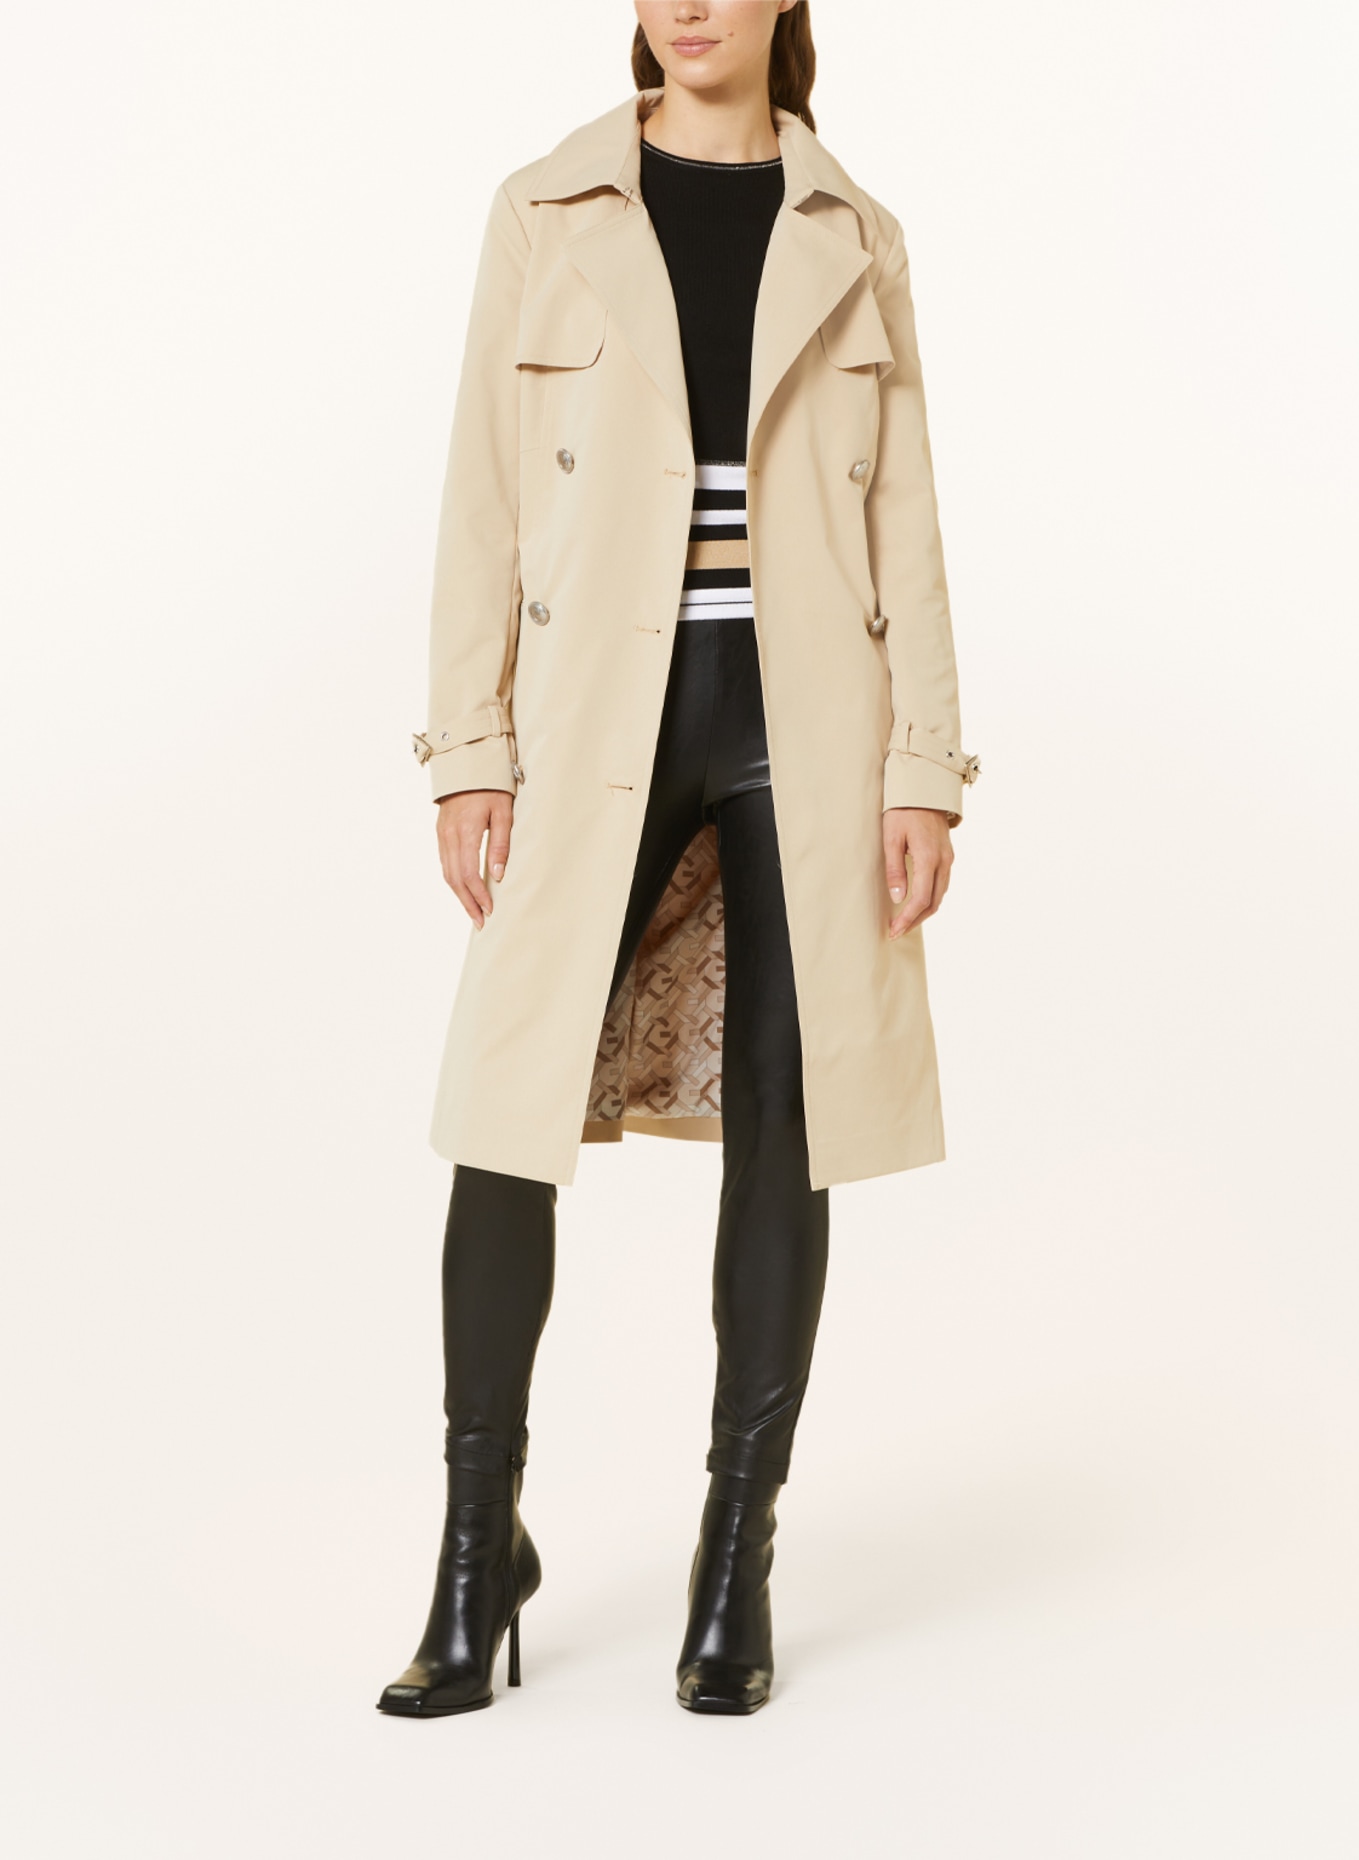 GUESS Trenchcoat ASIA, Farbe: BEIGE (Bild 2)